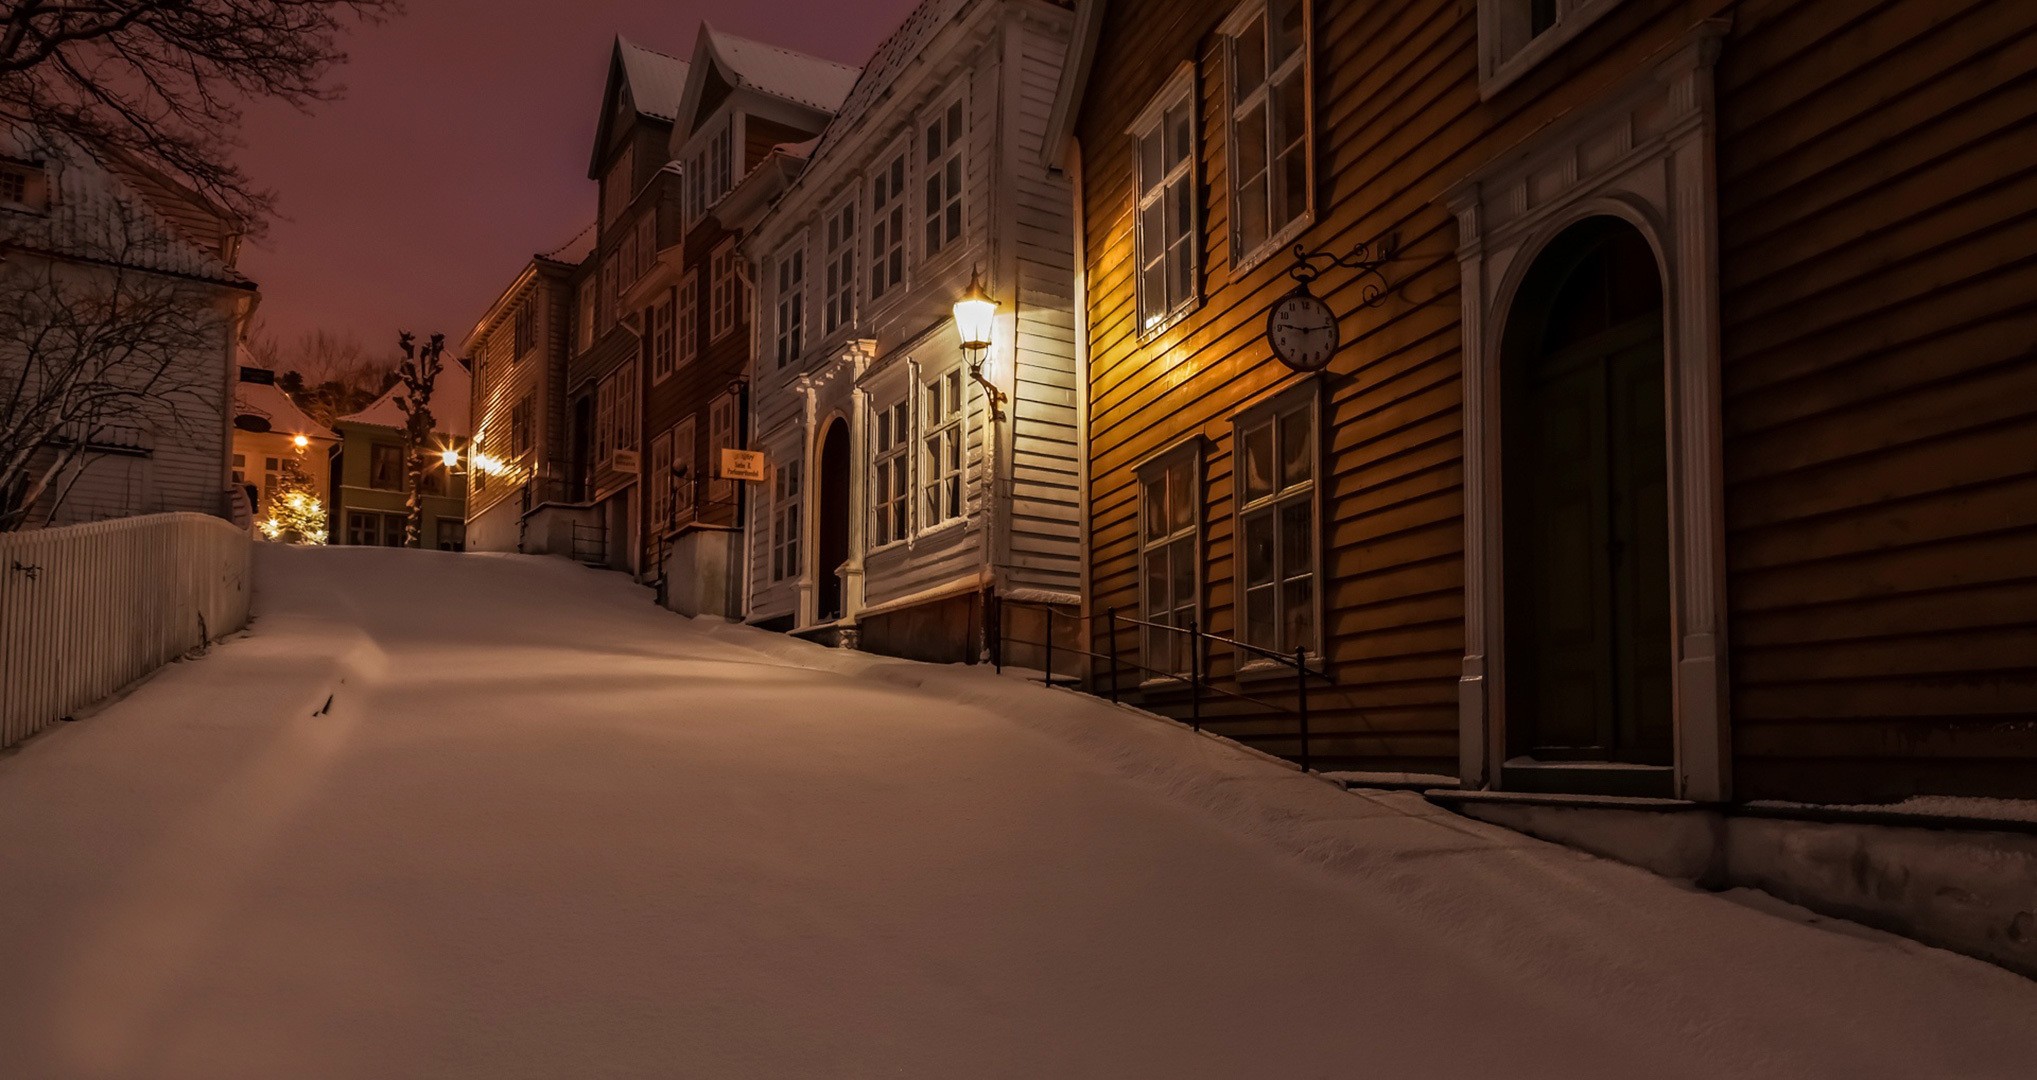 Wallpaper, trees, landscape, lights, street, night, nature, snow, winter, house, hills, Norway, evening, town, fence, light, weather, season, alley, blizzard 2037x1080